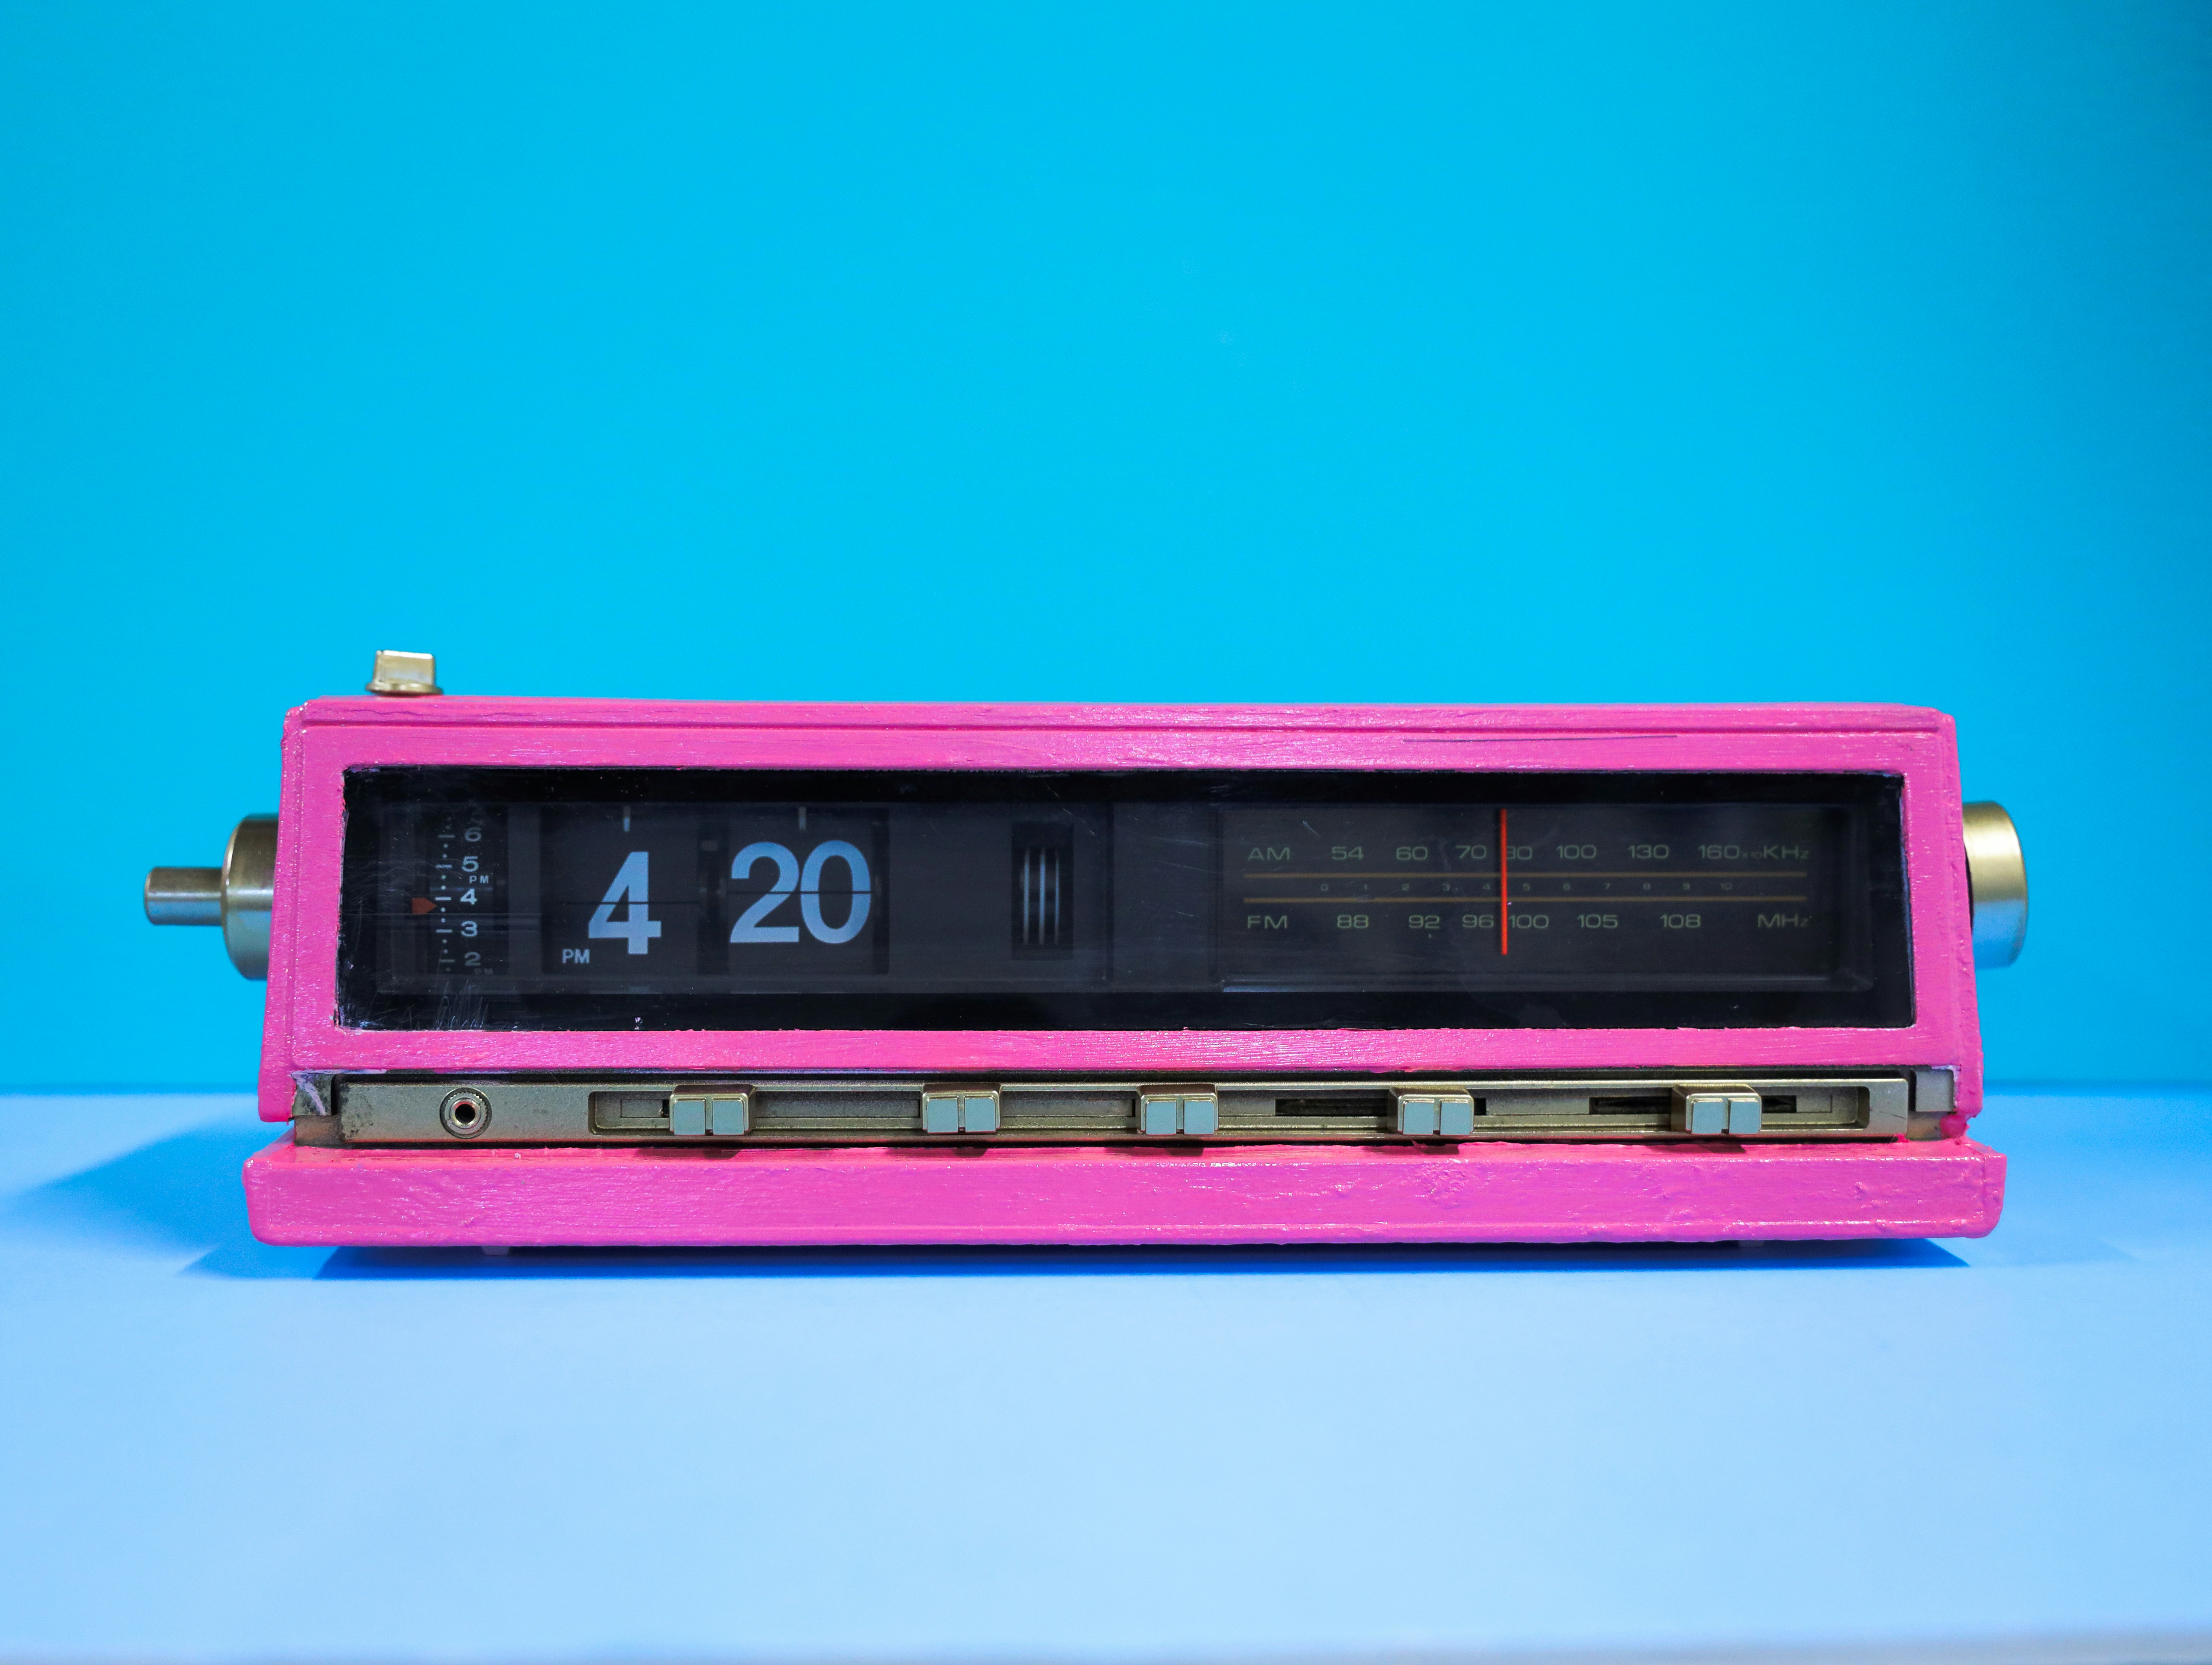 Sometimes, you have to take something old and give it a makeover. This classic am/fm radio told me to paint it pink and gold. I set it to the first radio station that I ever won concert tickets on when I was a teenager. The time, well, I only set it to that time because I thought a few people might appreciate it.